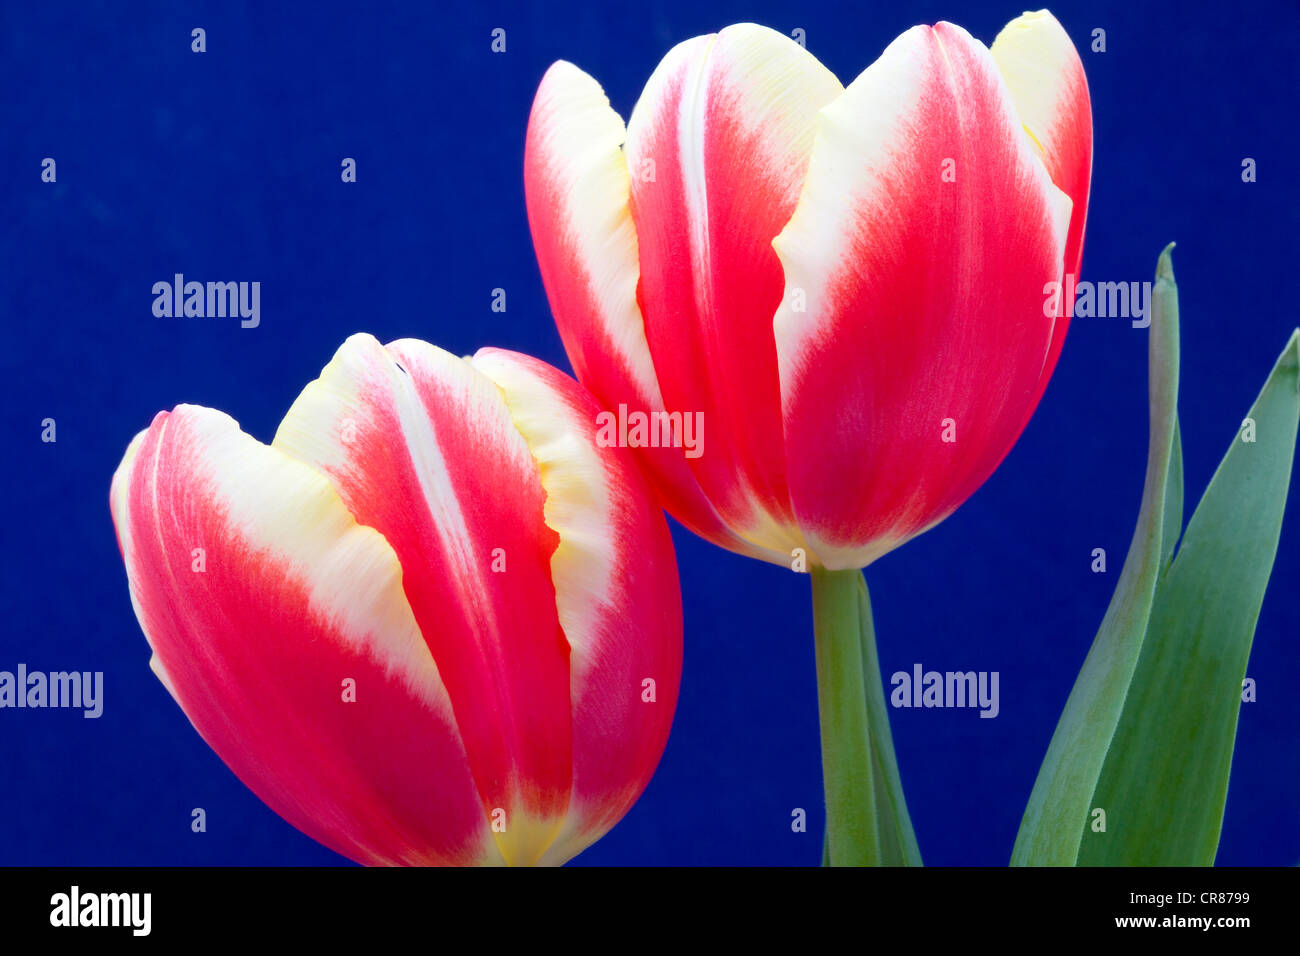 Two Tulips with Leaf and Stem Stock Photo